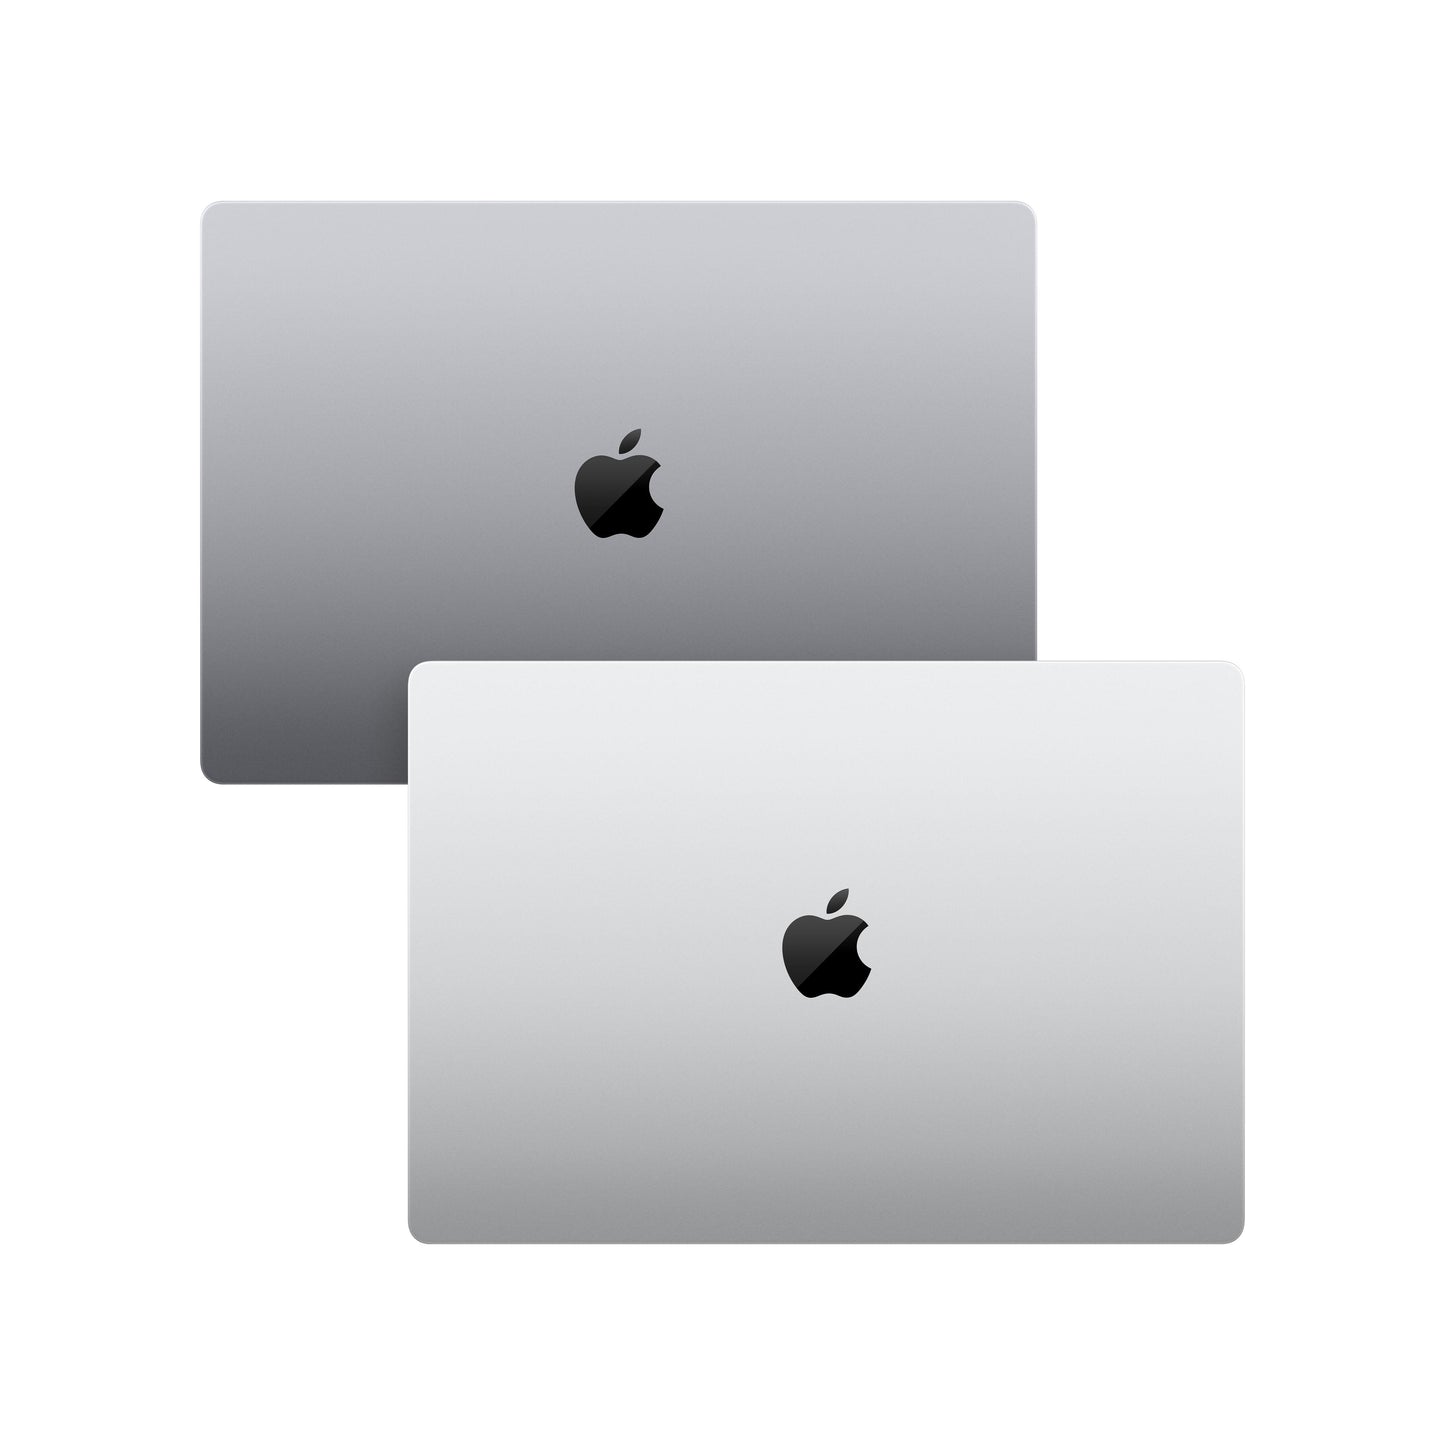 16-inch MacBook Pro: Apple M1 Pro chip with 10_core CPU and 16_core GPU, 1TB SSD - Space Grey